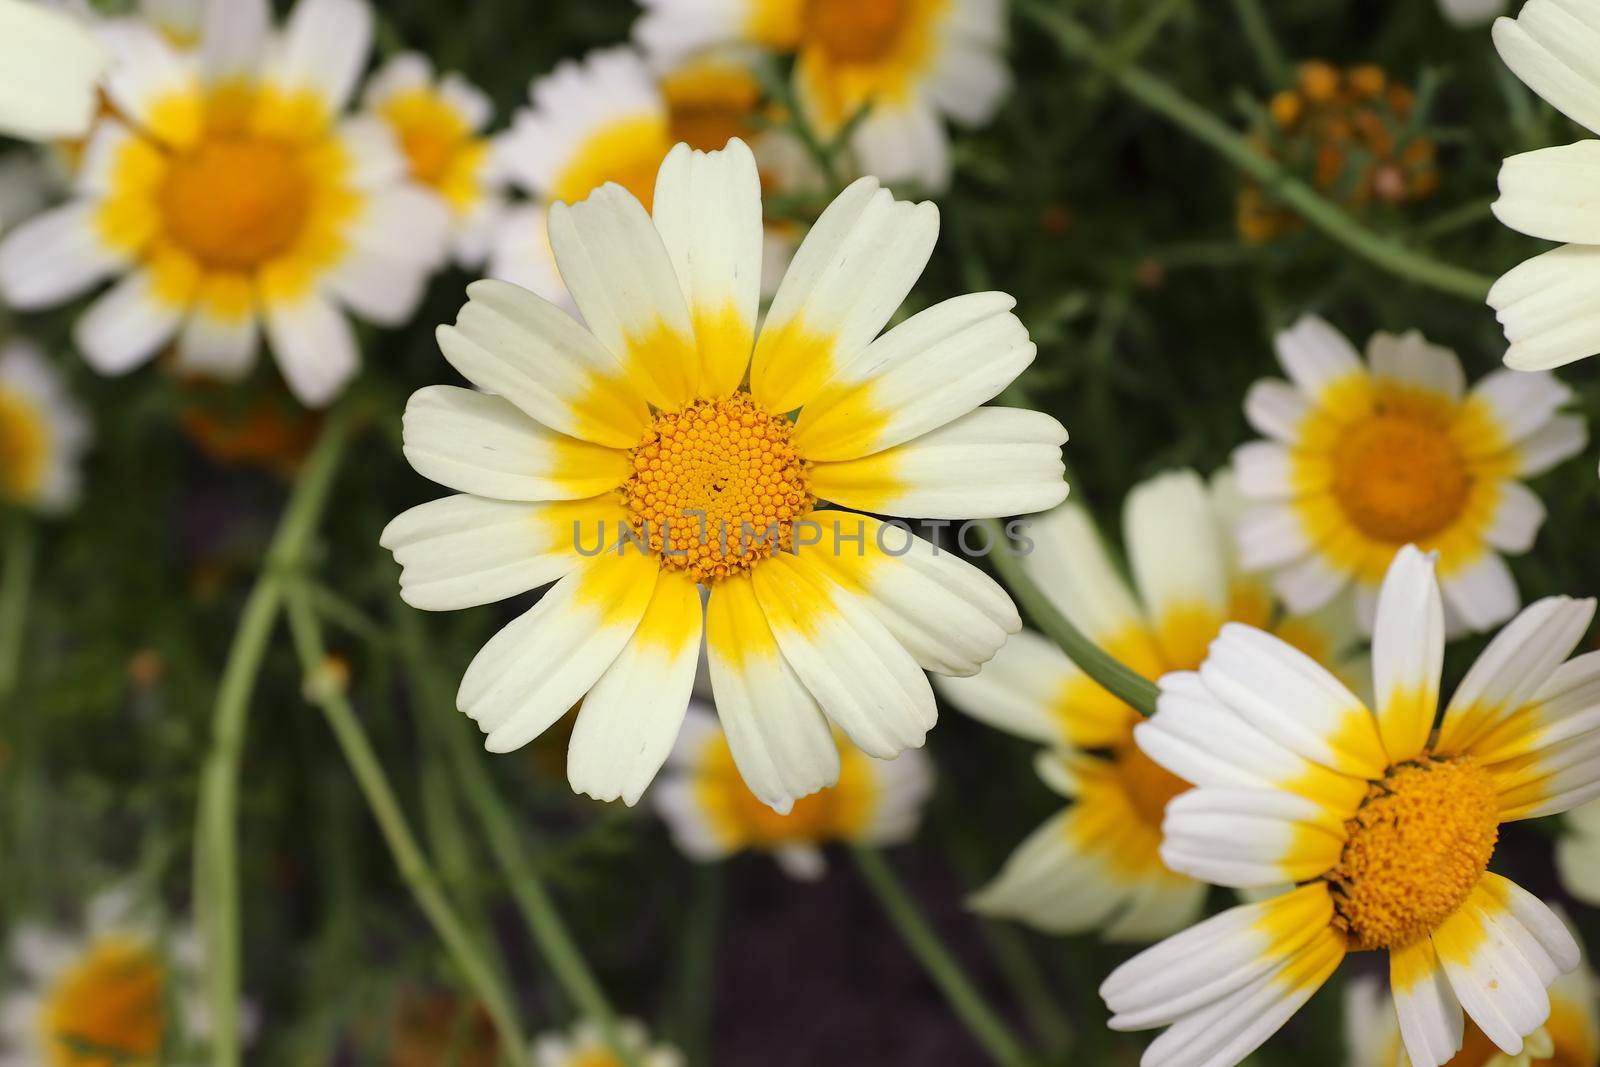 Garland chrysanthemum - an edible plant rich in minerals and vitamins